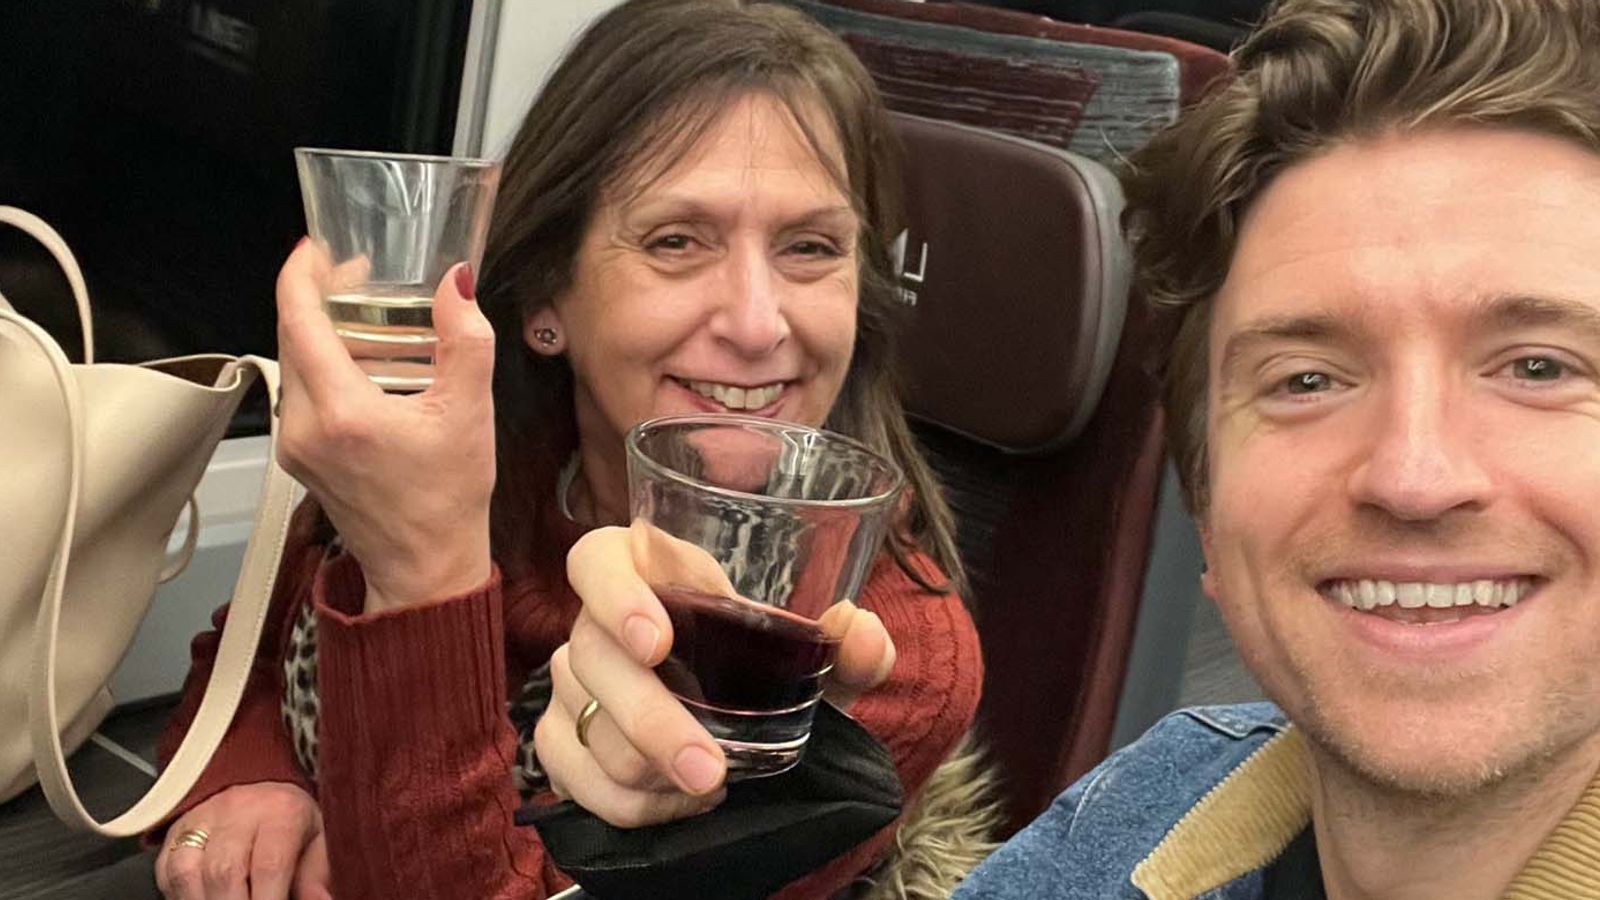 Jane thought she was sat next to Greg James on a train. Her daughter then tweeted the DJ to check